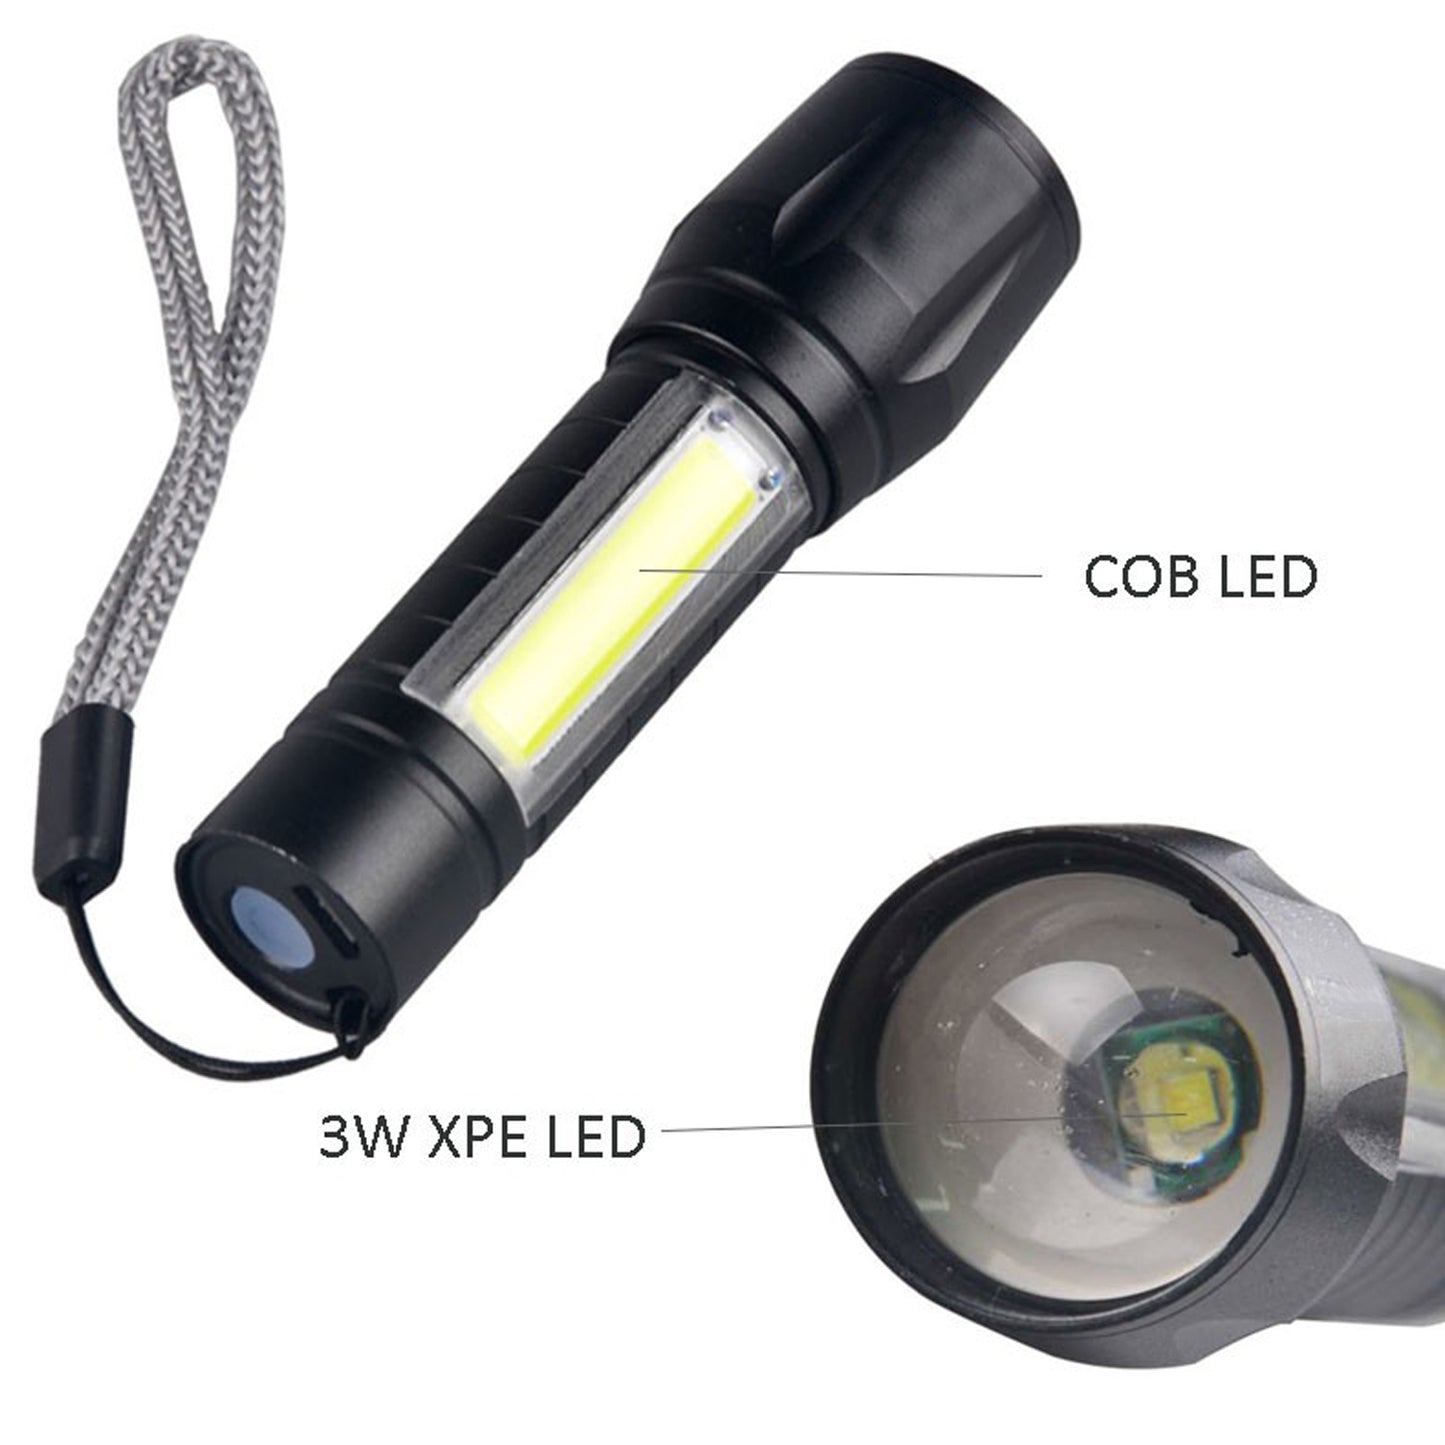 WRADER USB Charging Mini Torch Light for Home Night and Camping Pocket Torch Light Torch